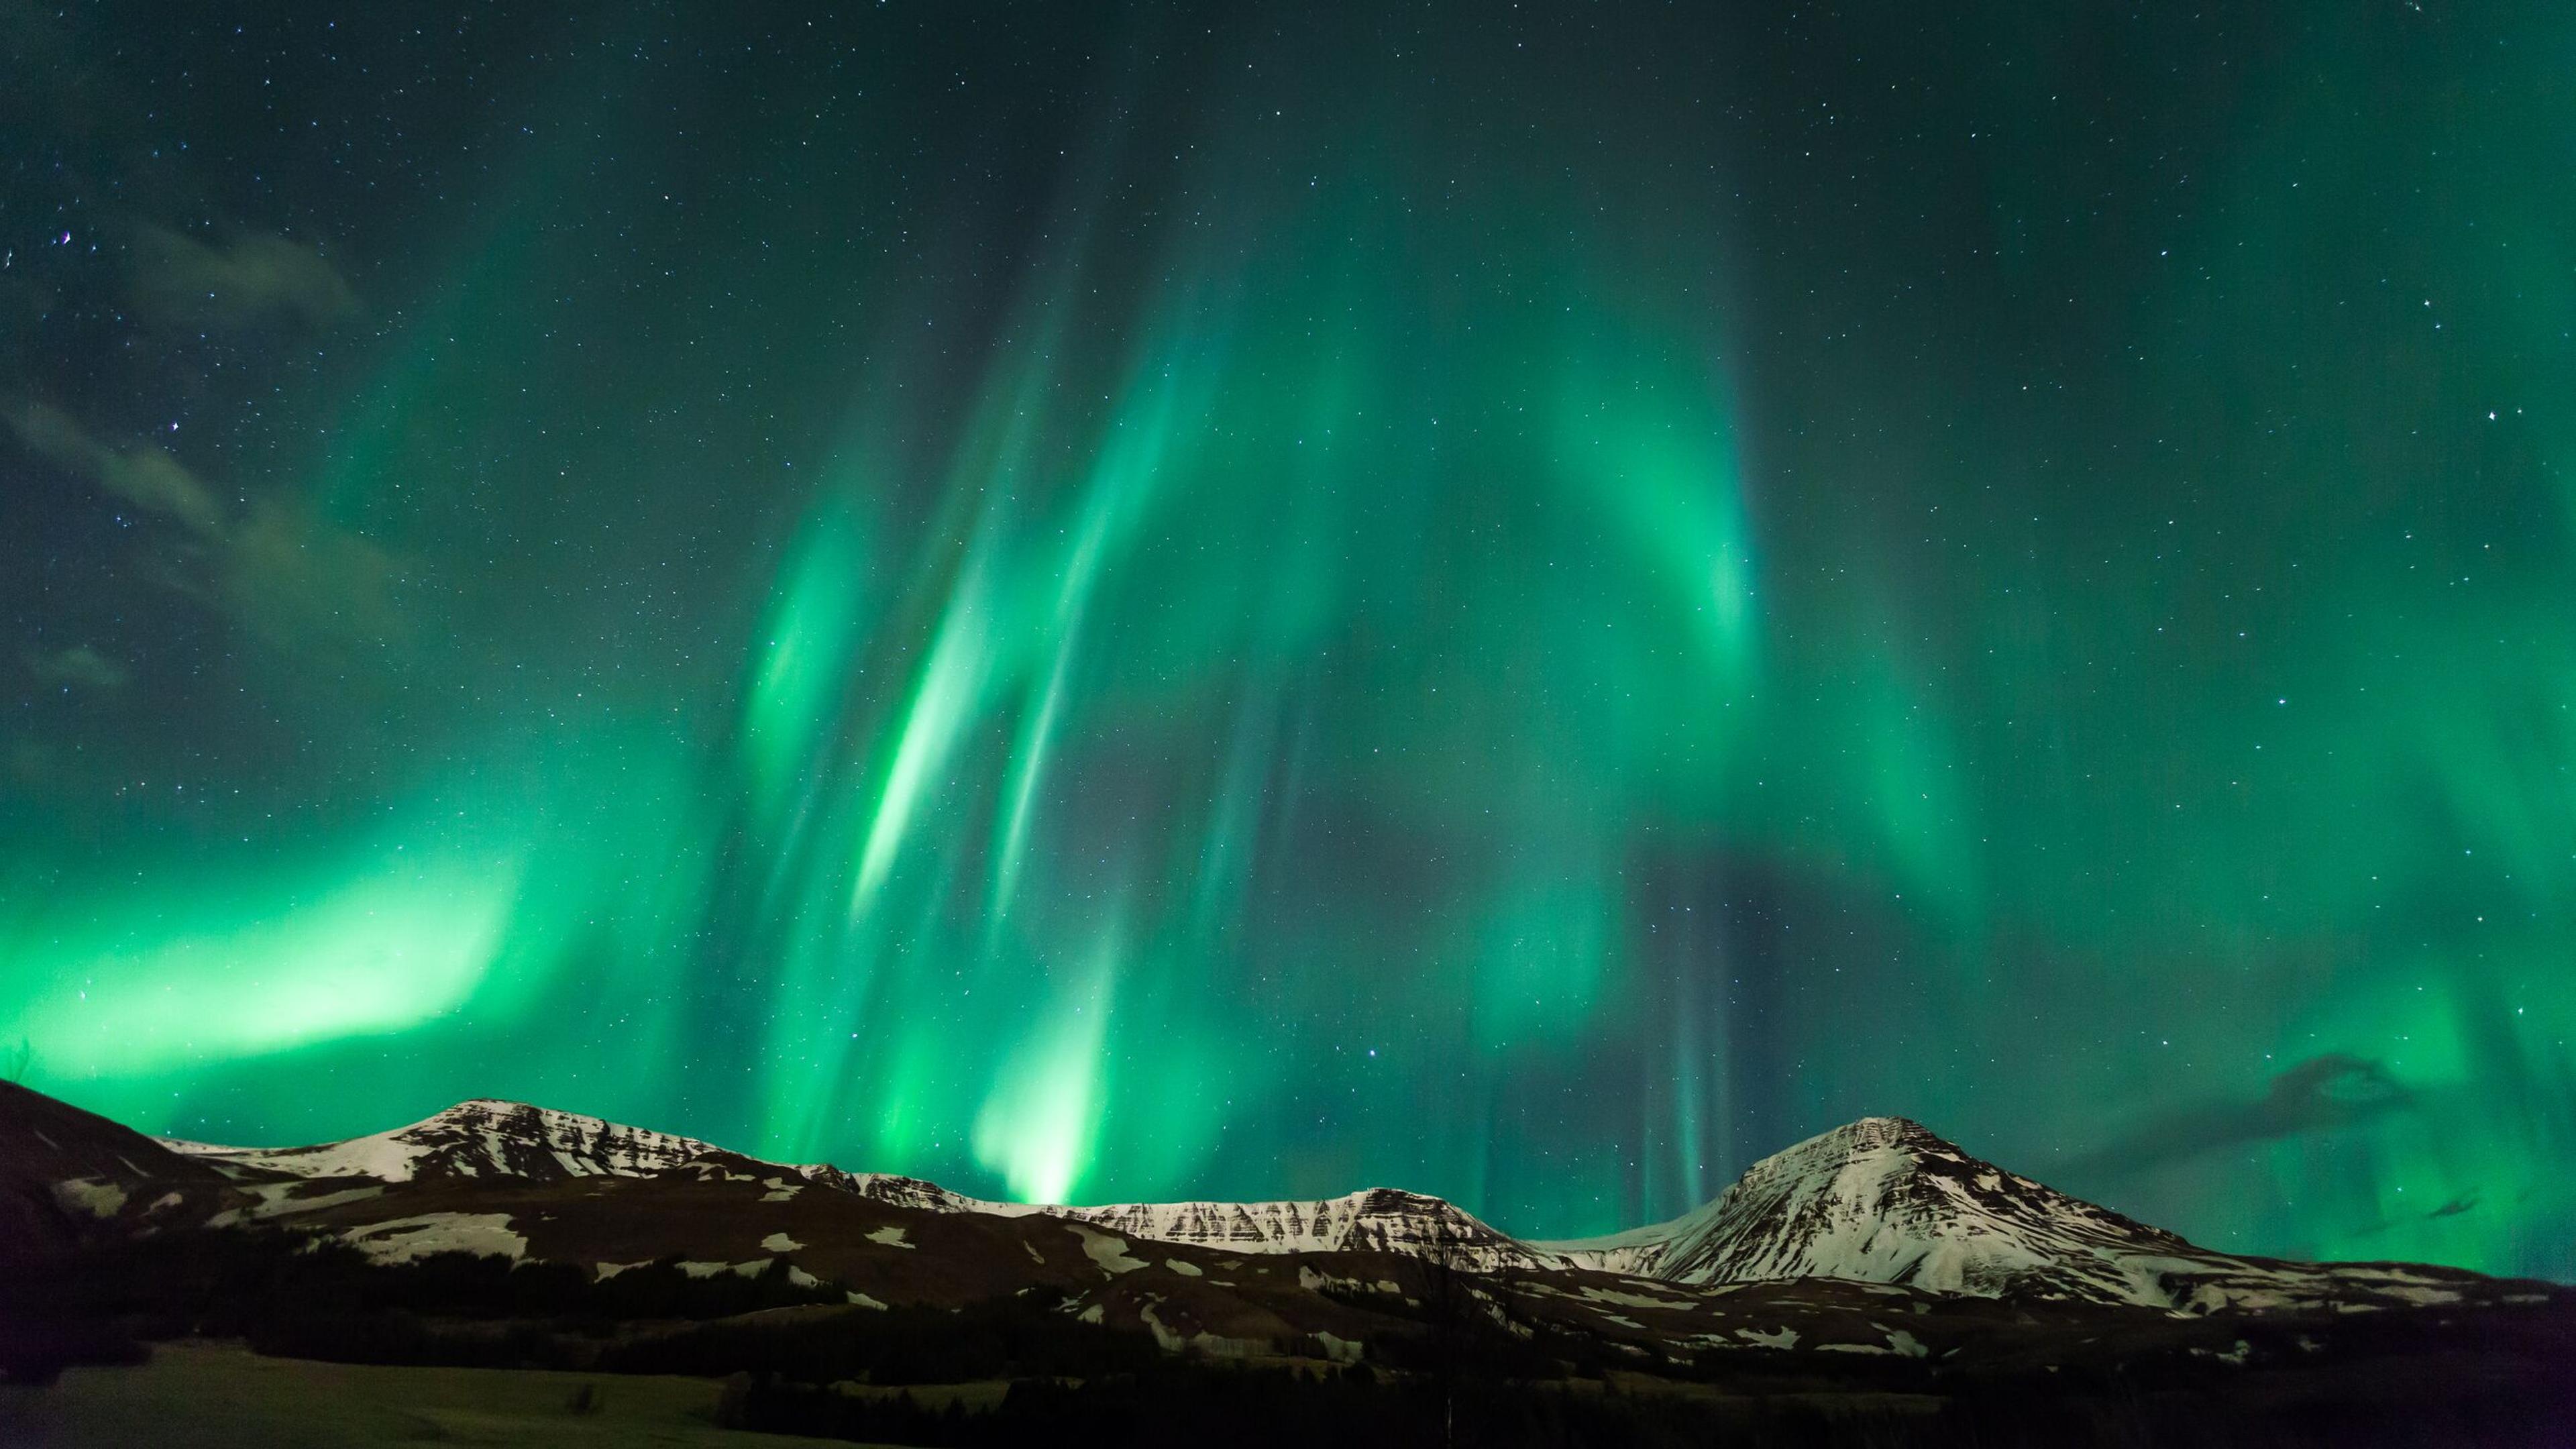 A stunning view of the Northern Lights, or Aurora Borealis, with vibrant green hues dancing across the night sky above a serene snow-capped mountain landscape.